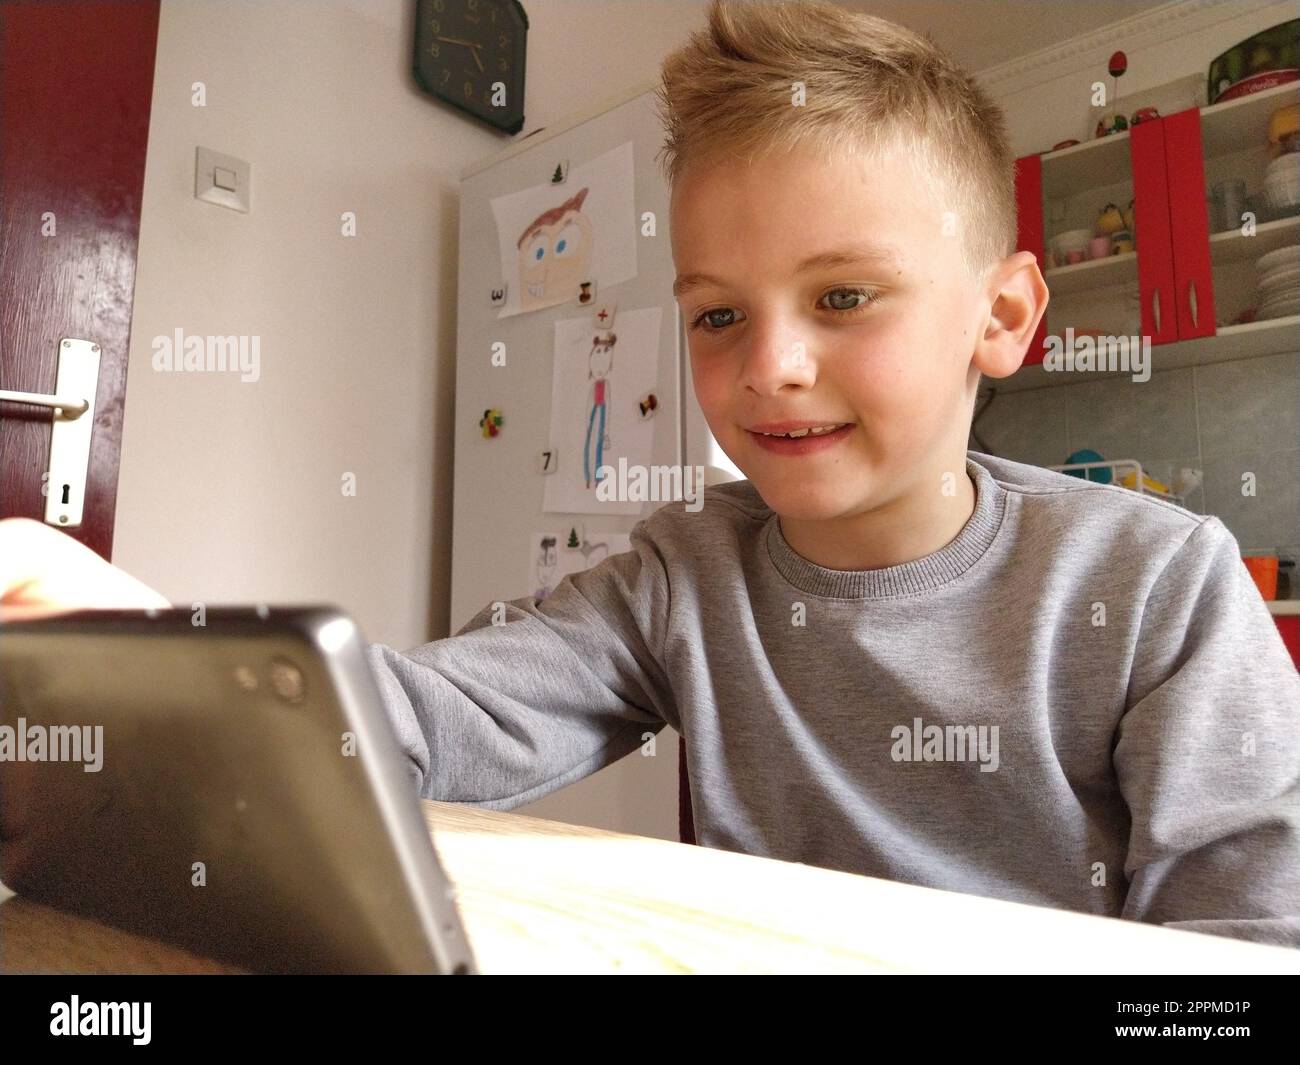 Sremska Mitrovica, Serbia, May 20, 2020 Blond boy with laptop. The child looks at the monitor. The emotion of joy Stock Photo